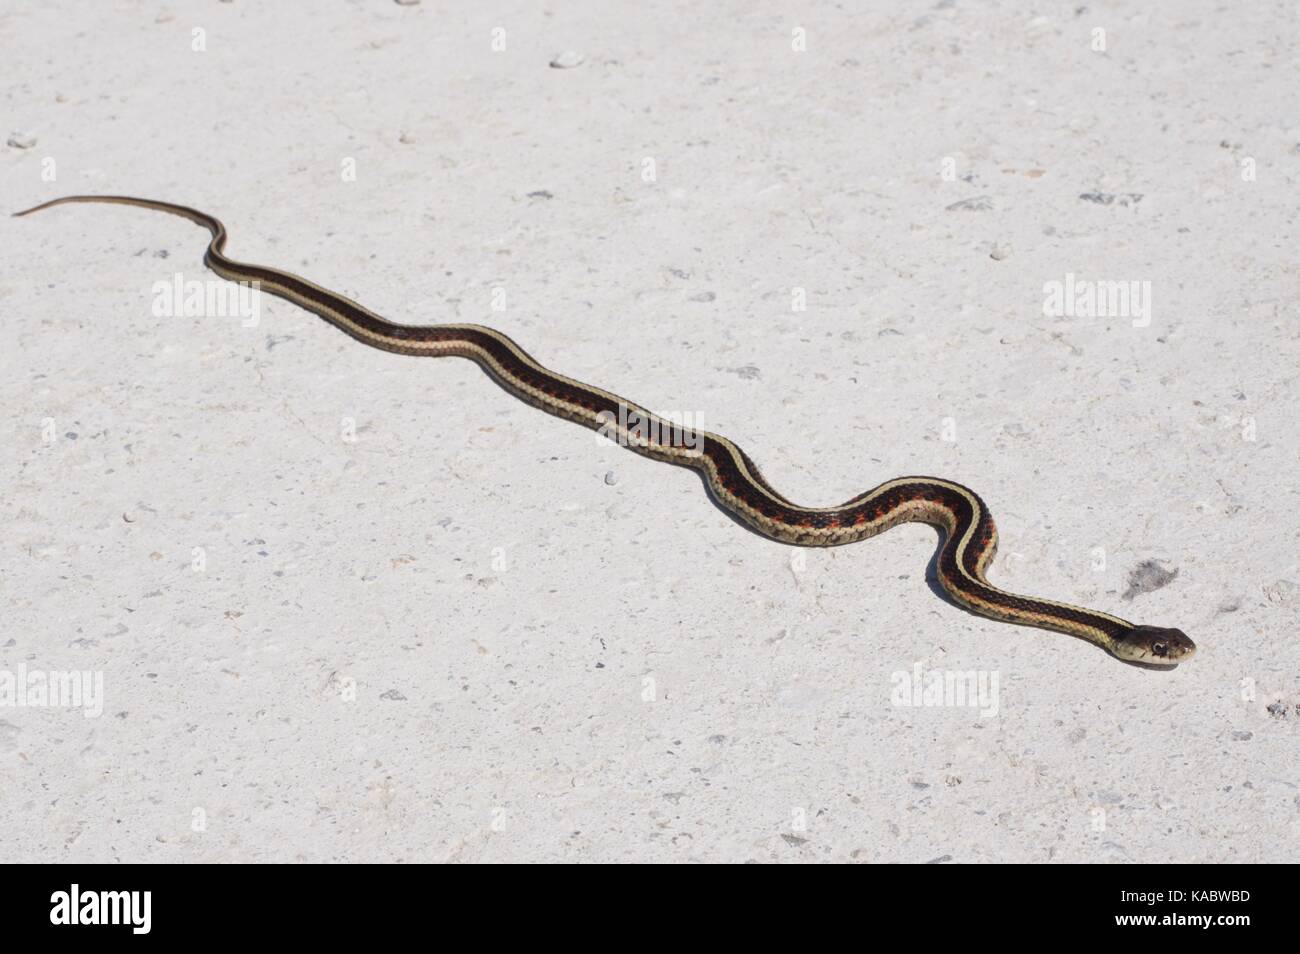 A Red-sided Gartersnake (Thamnophis sirtalis parietalis) stretched out on a gravel road at Squaw Creek National Wildlife Refuge, Missouri, USA Stock Photo